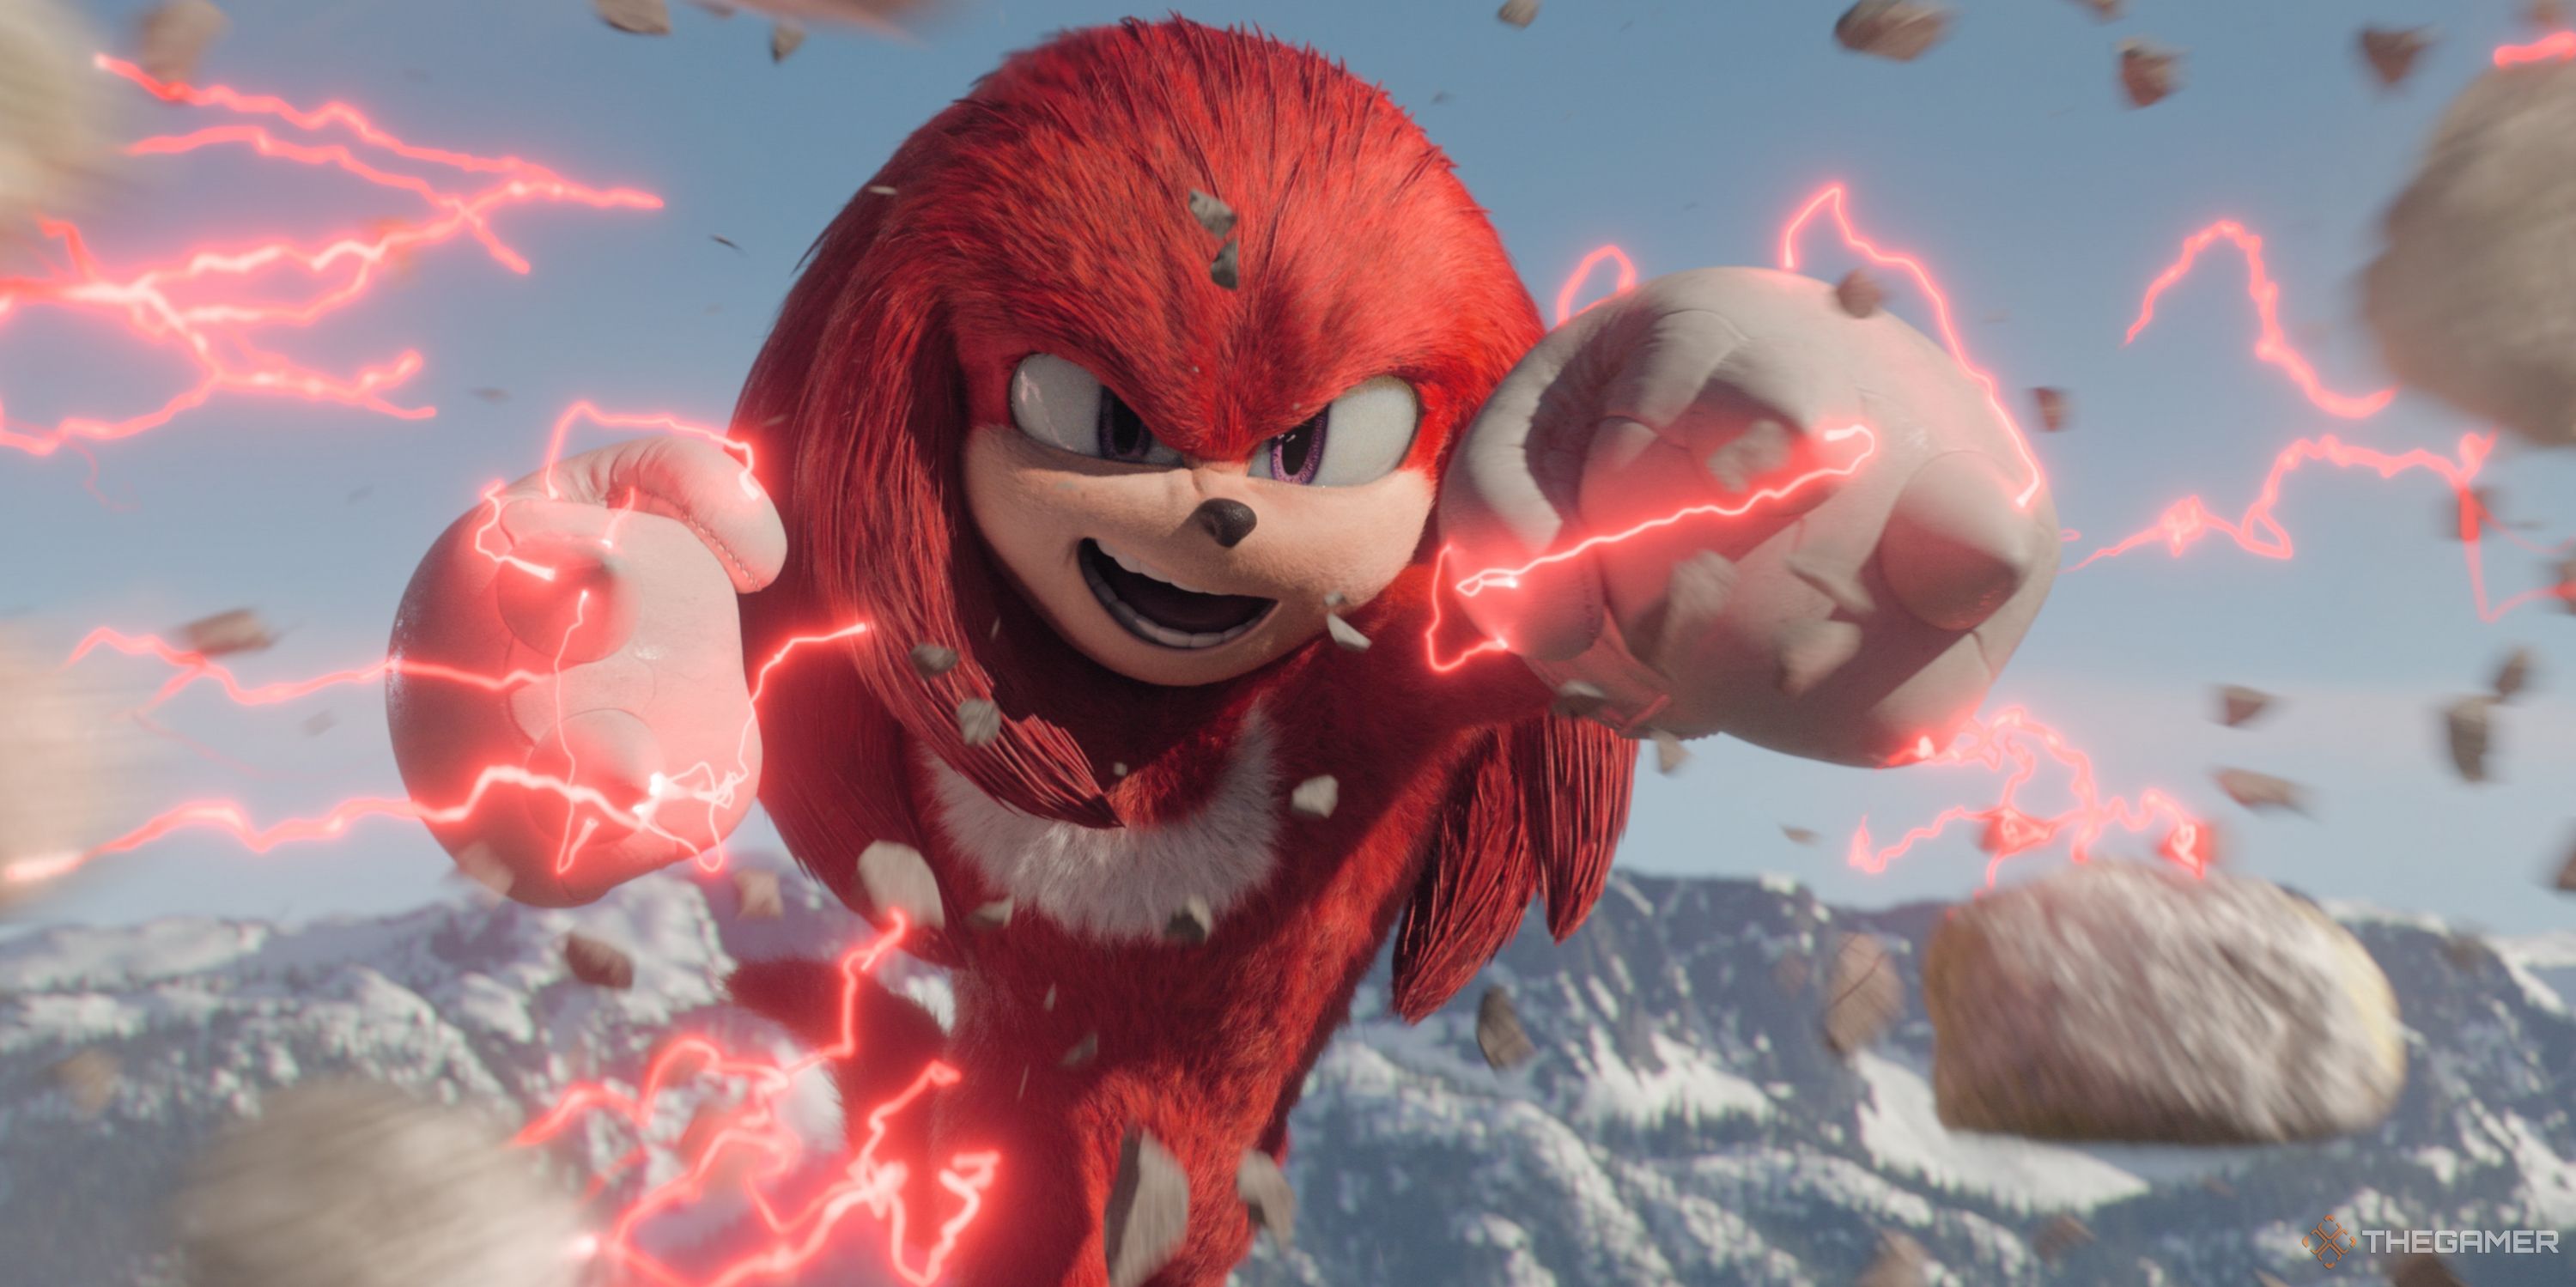 Knuckles smashing rocks in the Knuckles series